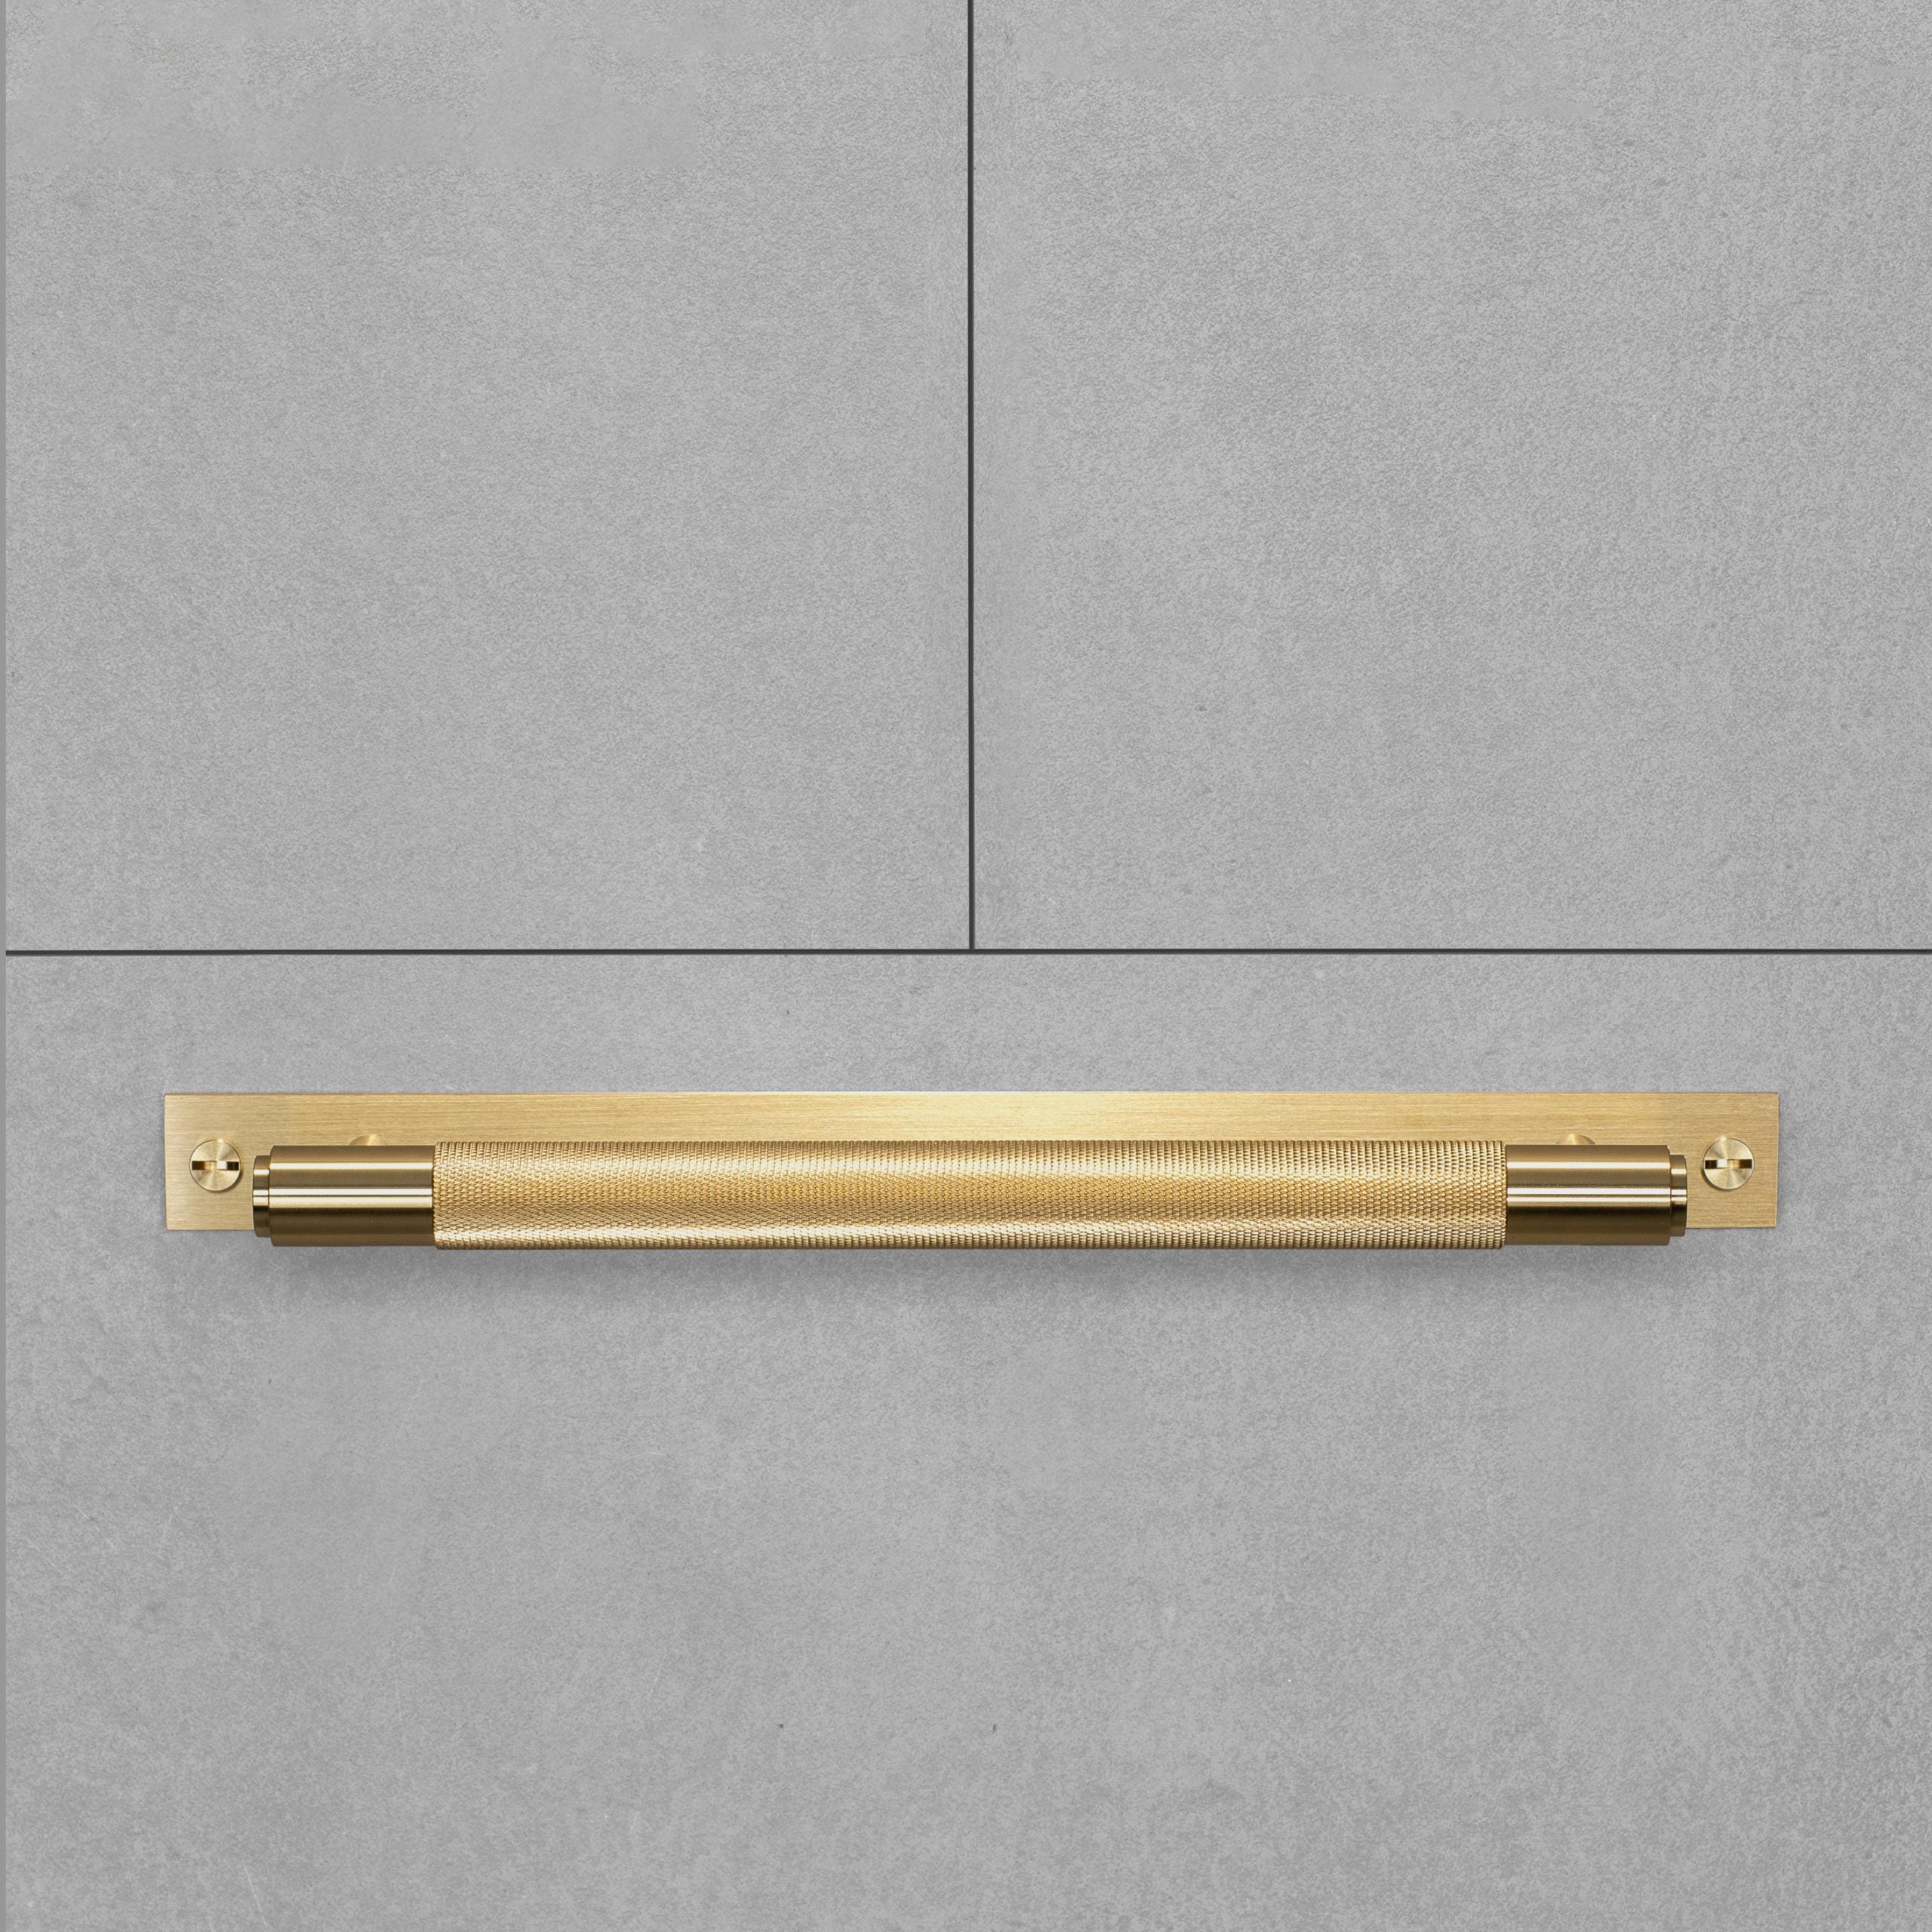 Buster + Punch Pull Bar, Cross Design Hardware Buster + Punch Brass 0.21x0.07x0.03 